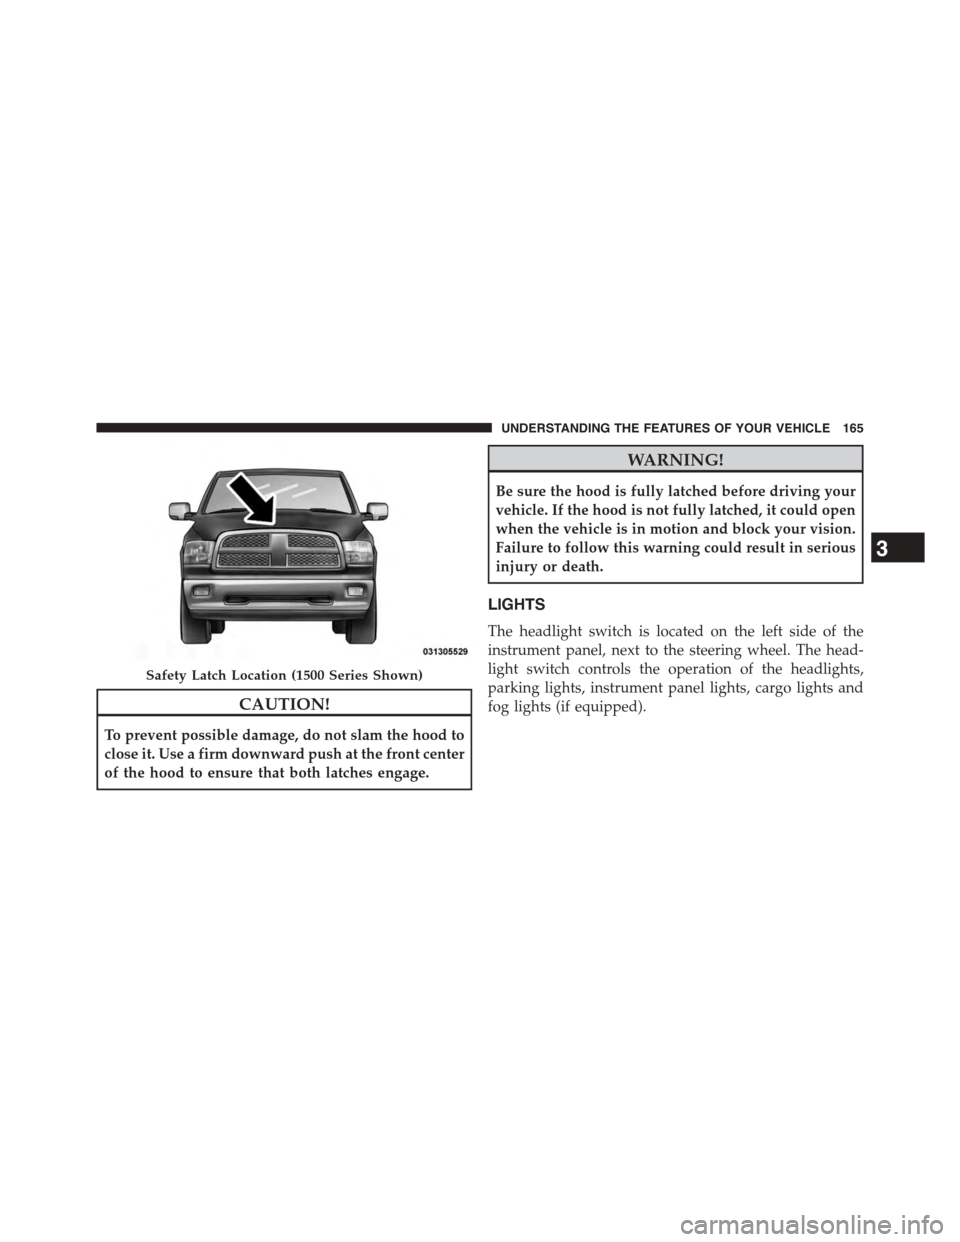 Ram 1500 2015  Owners Manual CAUTION!
To prevent possible damage, do not slam the hood to
close it. Use a firm downward push at the front center
of the hood to ensure that both latches engage.
WARNING!
Be sure the hood is fully l